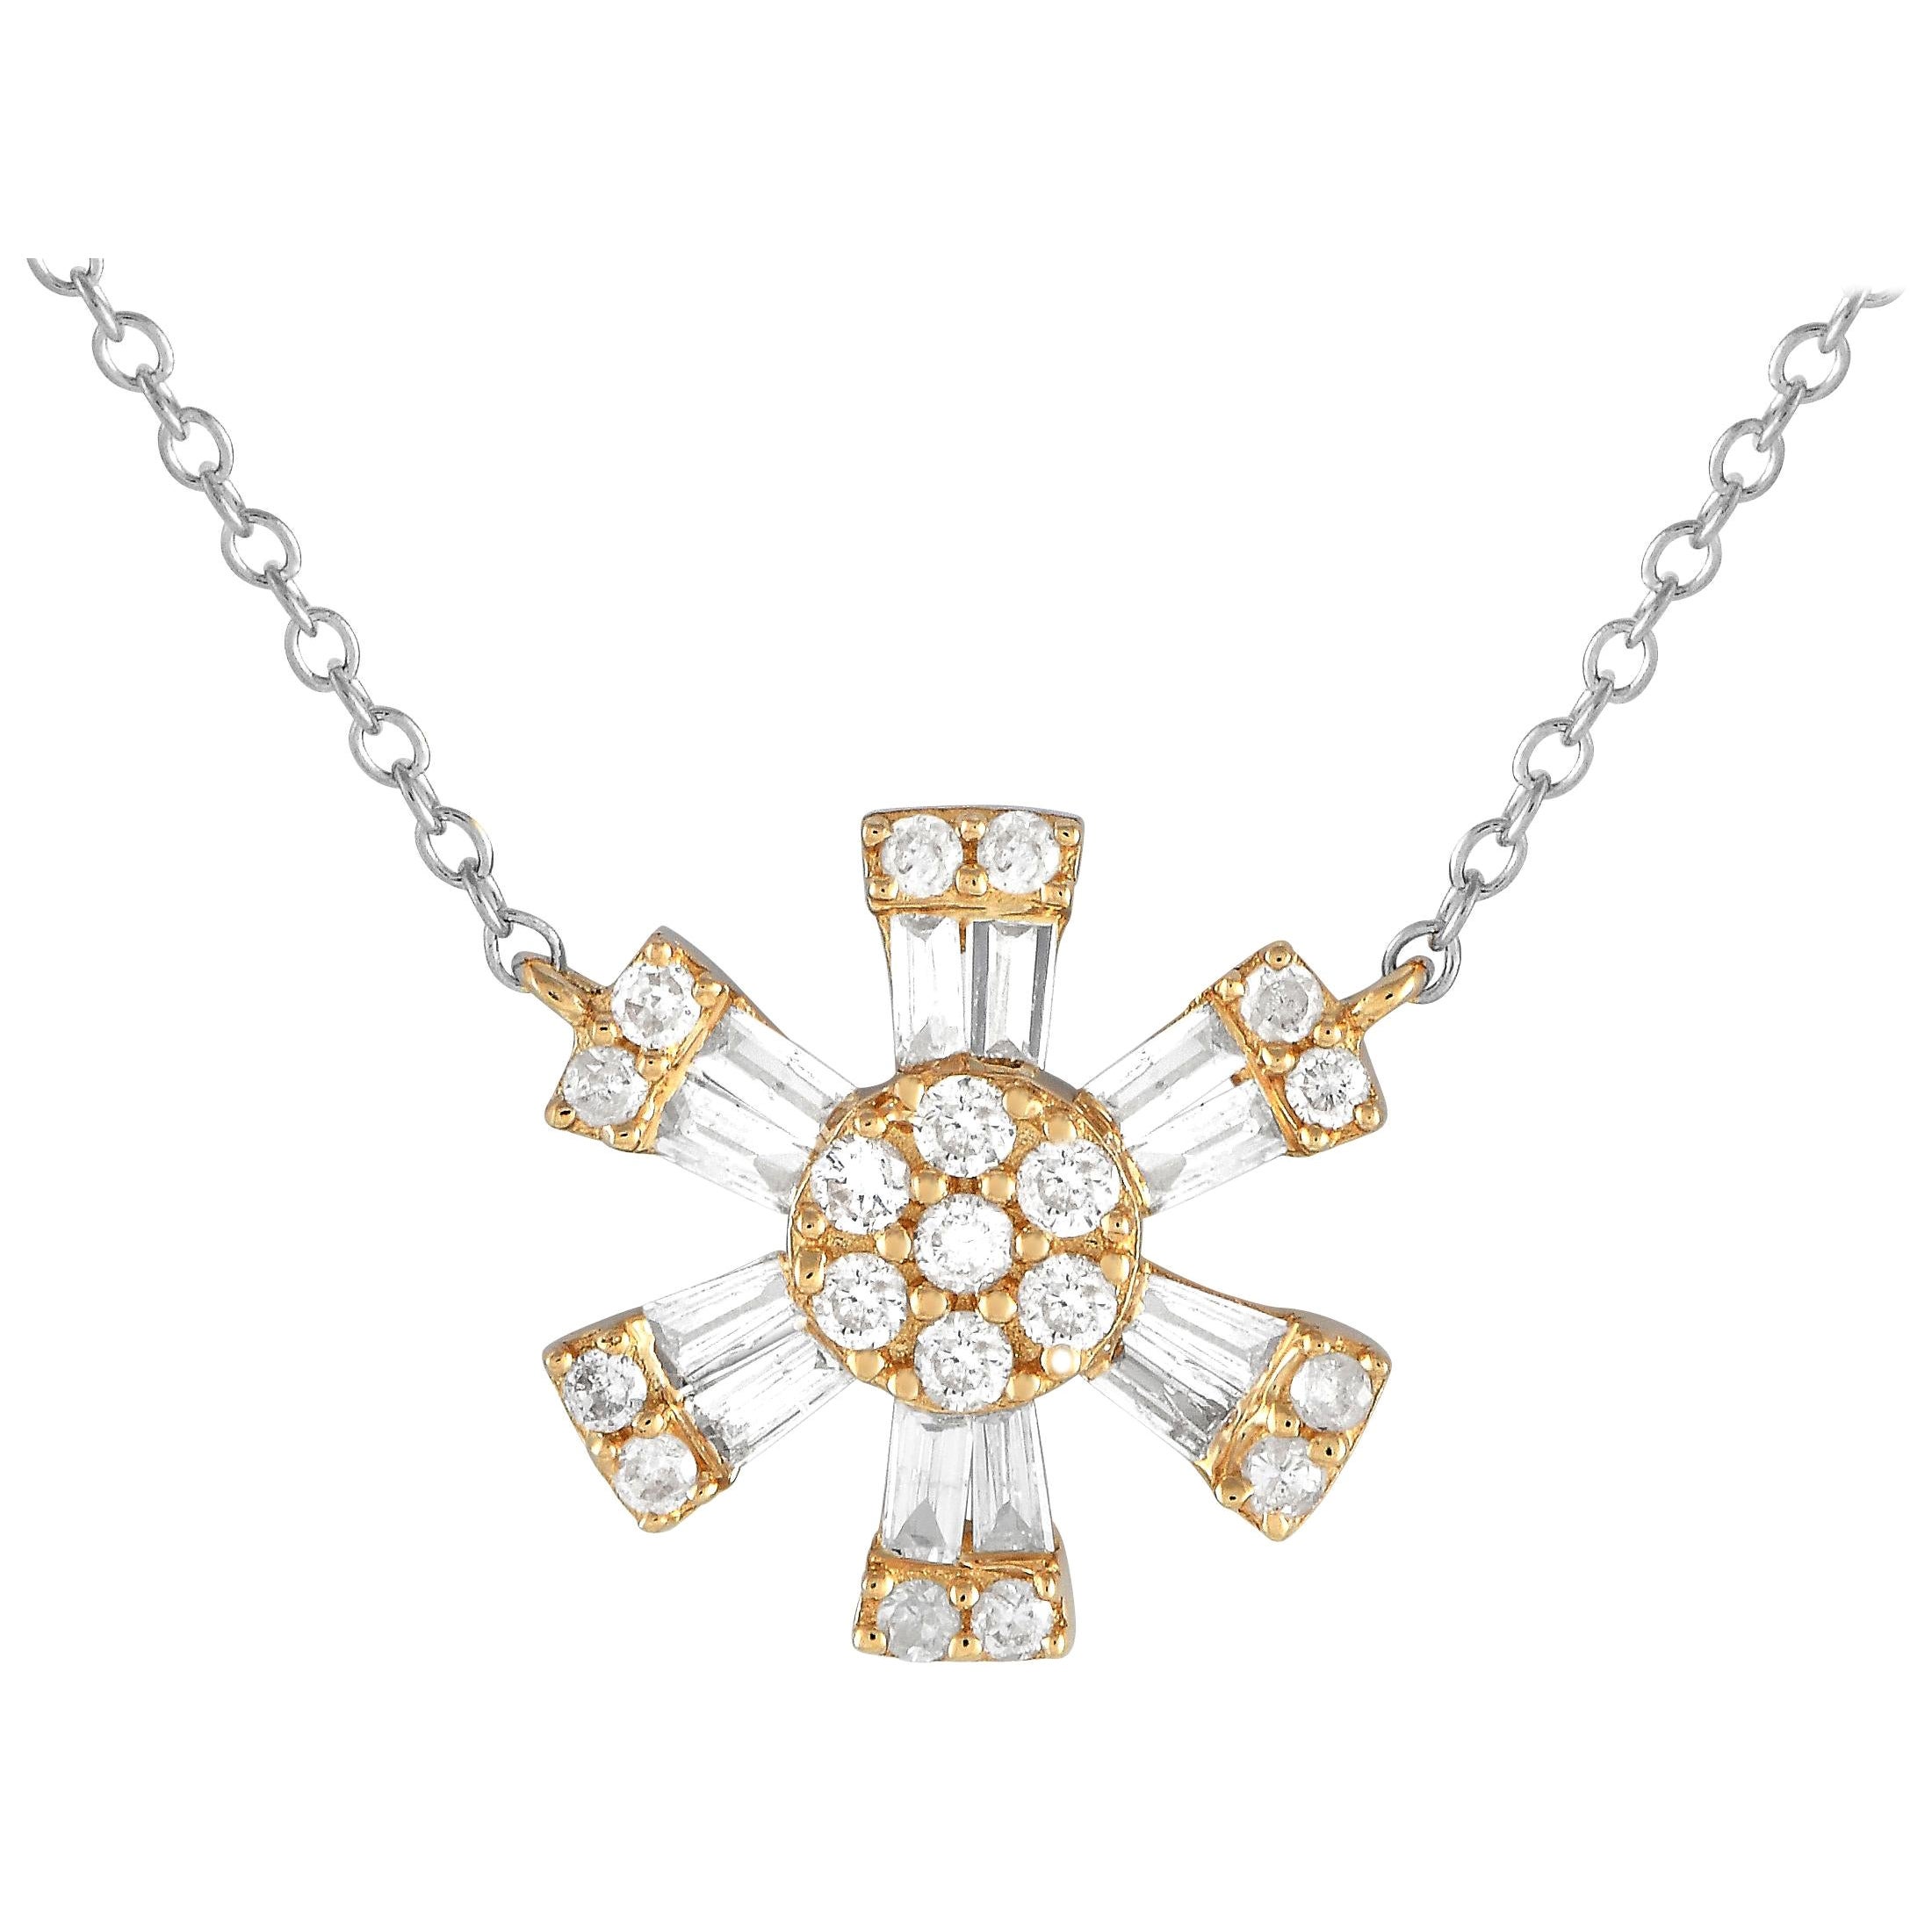 LB Exclusive 14K White and Yellow Gold 0.25ct Diamond Necklace For Sale